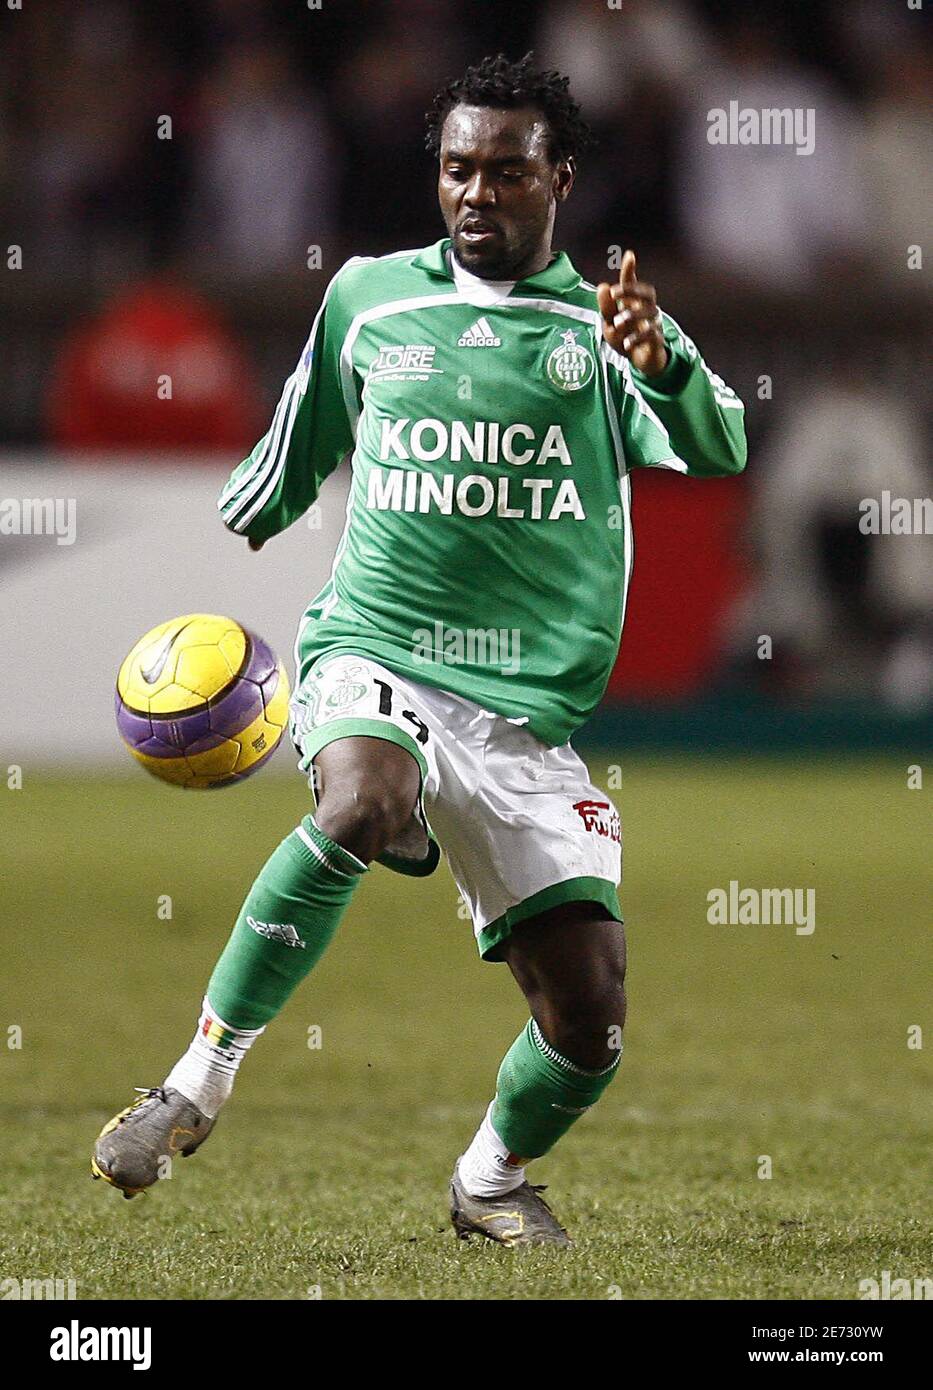 ASSE's Pascal Feindouno in action during the French first league football  match Paris Saint-Germain vs AS Saint-Etienne at the Parc des Princes  stadium in Paris, France, on February 25, 2007. ASSE won